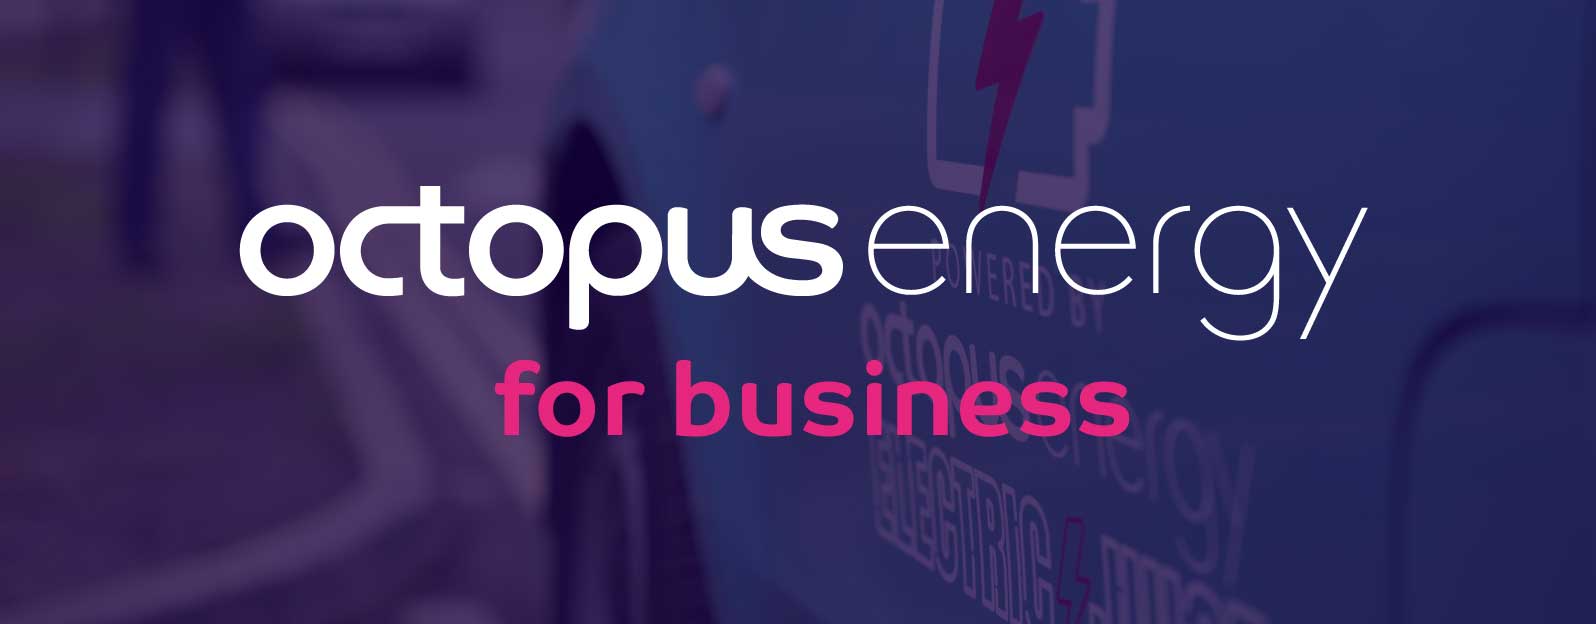 octopus-energy-group